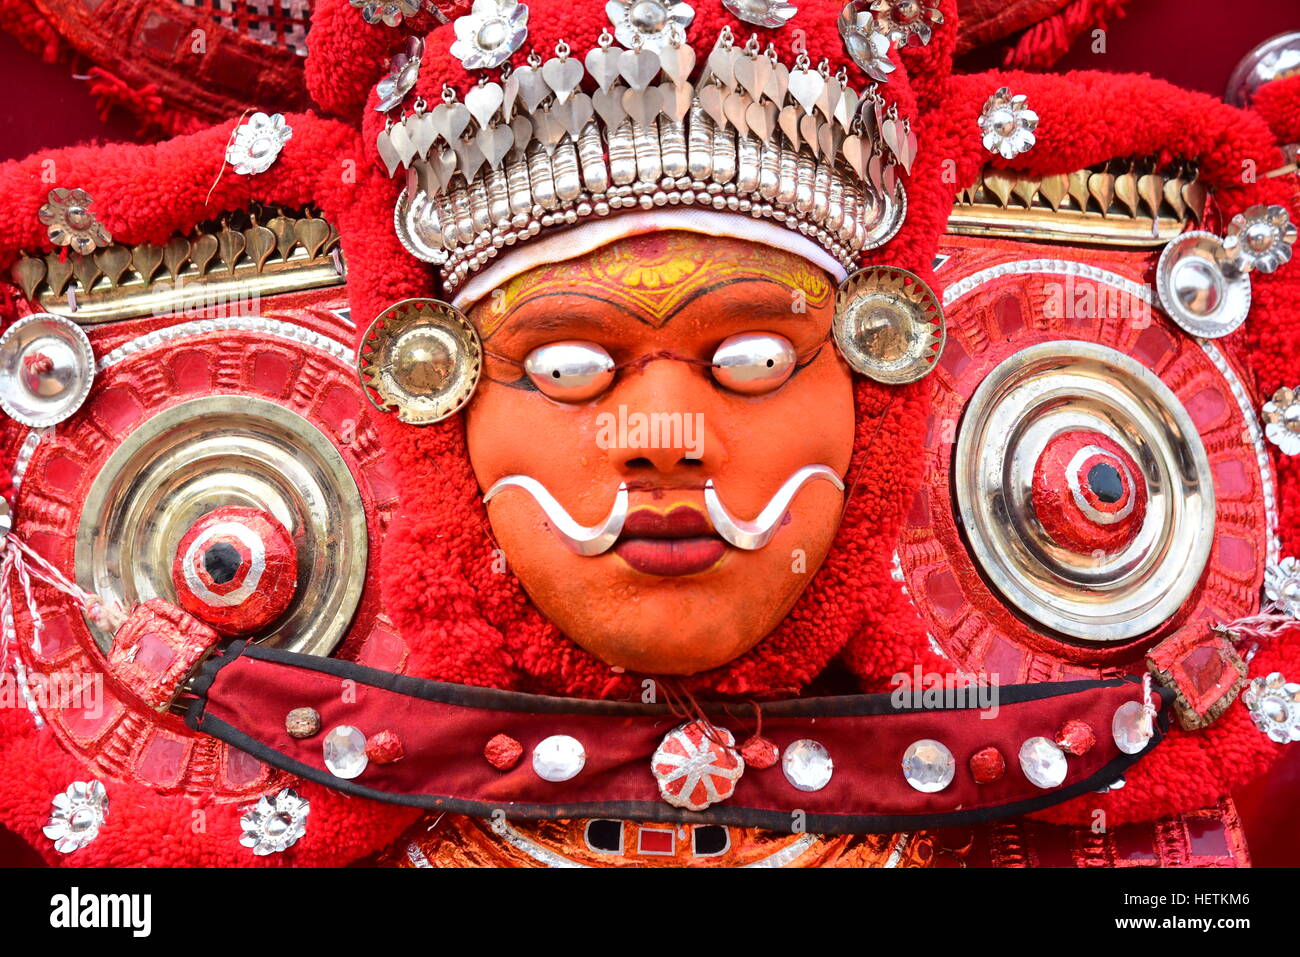 THEYYAM OR THEYYATTAM IS A POPULAR HINDU RITUAL FORM OF WORSHIP OF NORTH MALABAR IN KERALA STATE, INDIA, Stock Photo